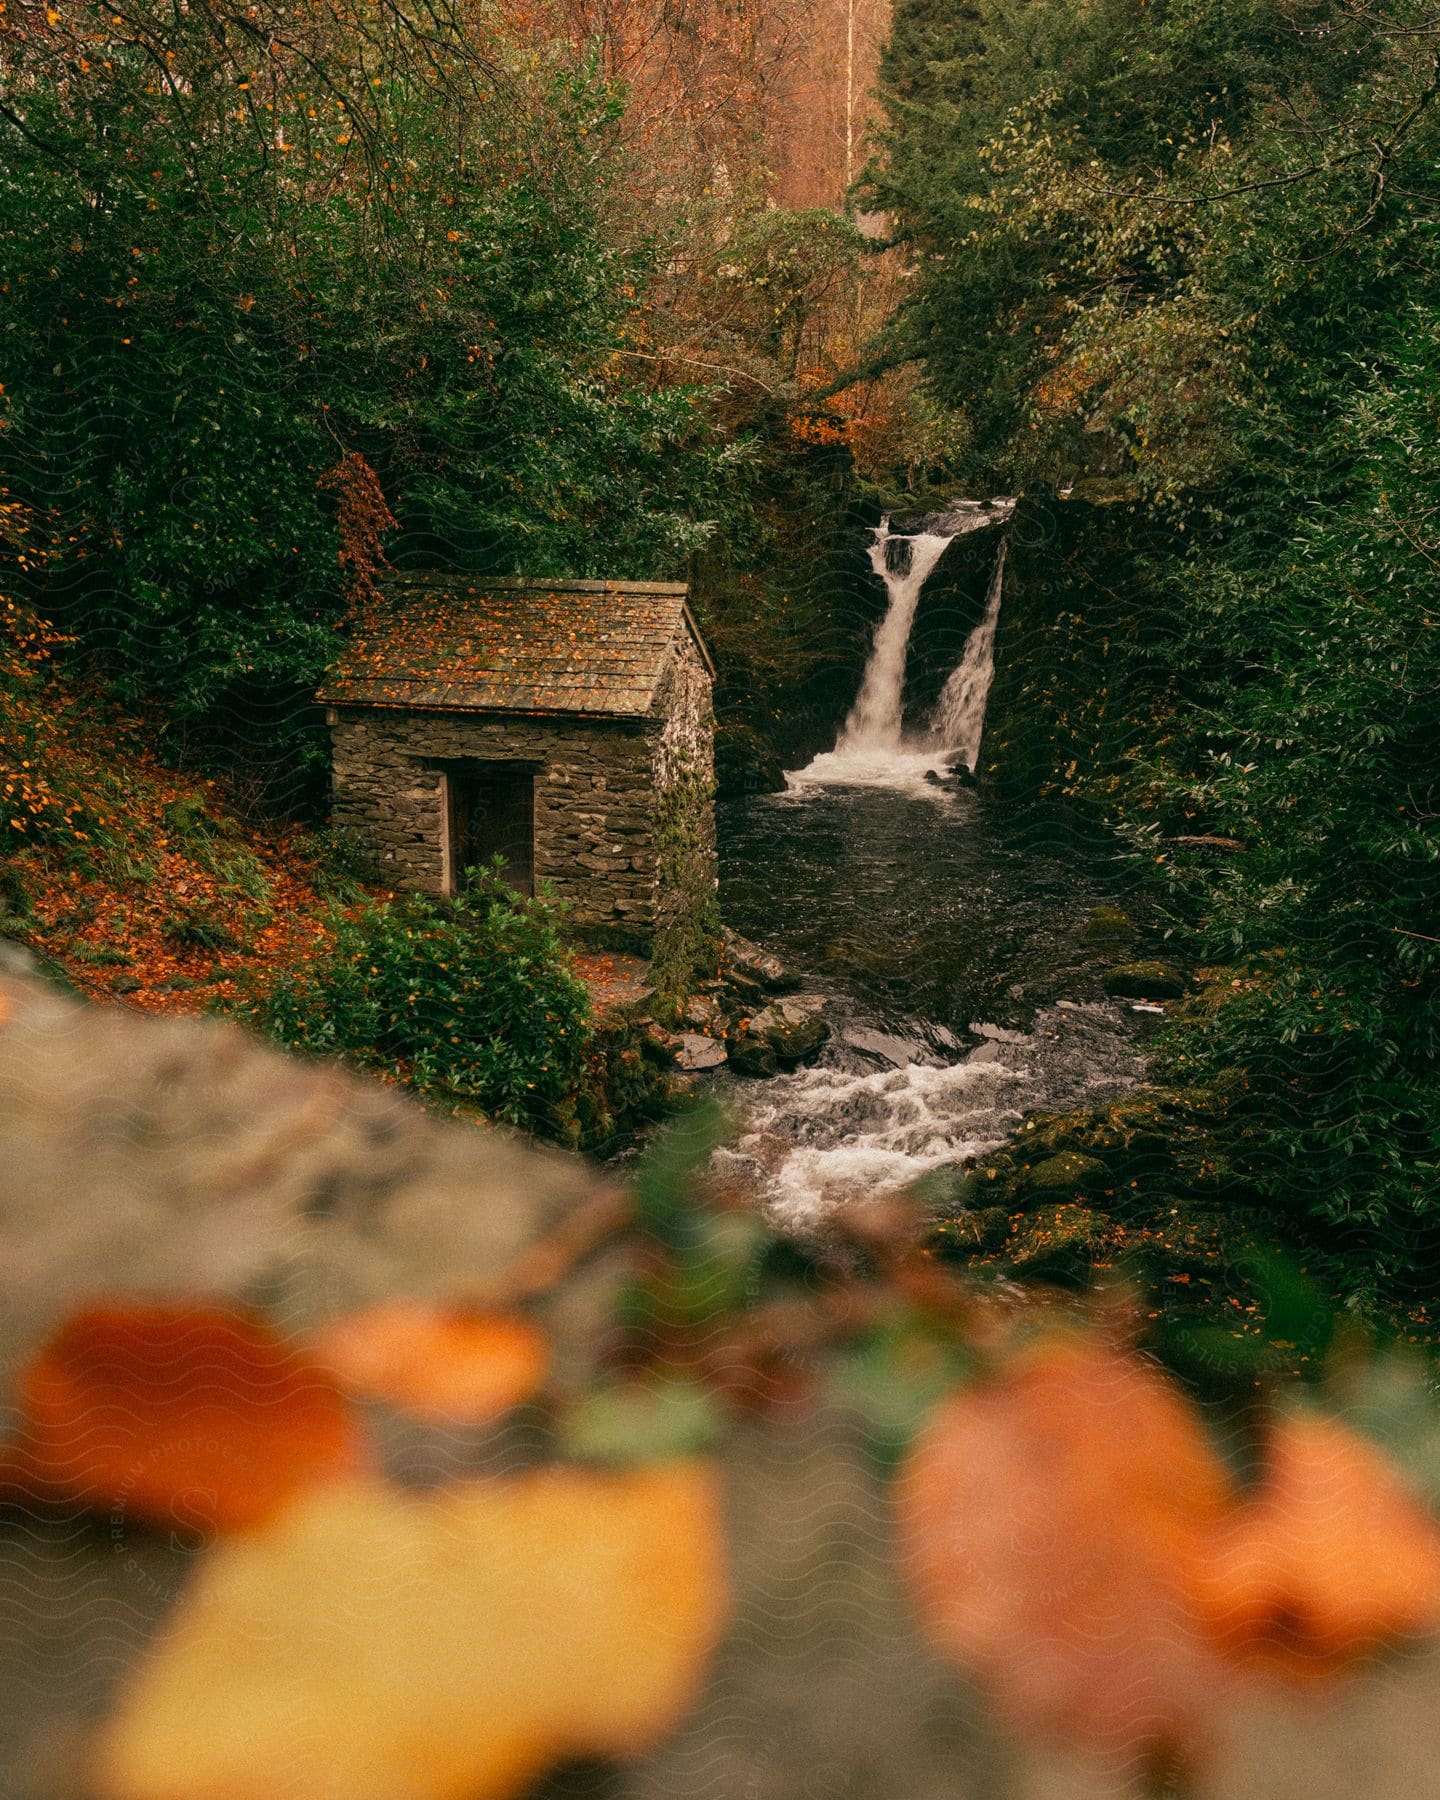 A stone hut sits on a rocky bank next to a small waterfall on an autumn day.